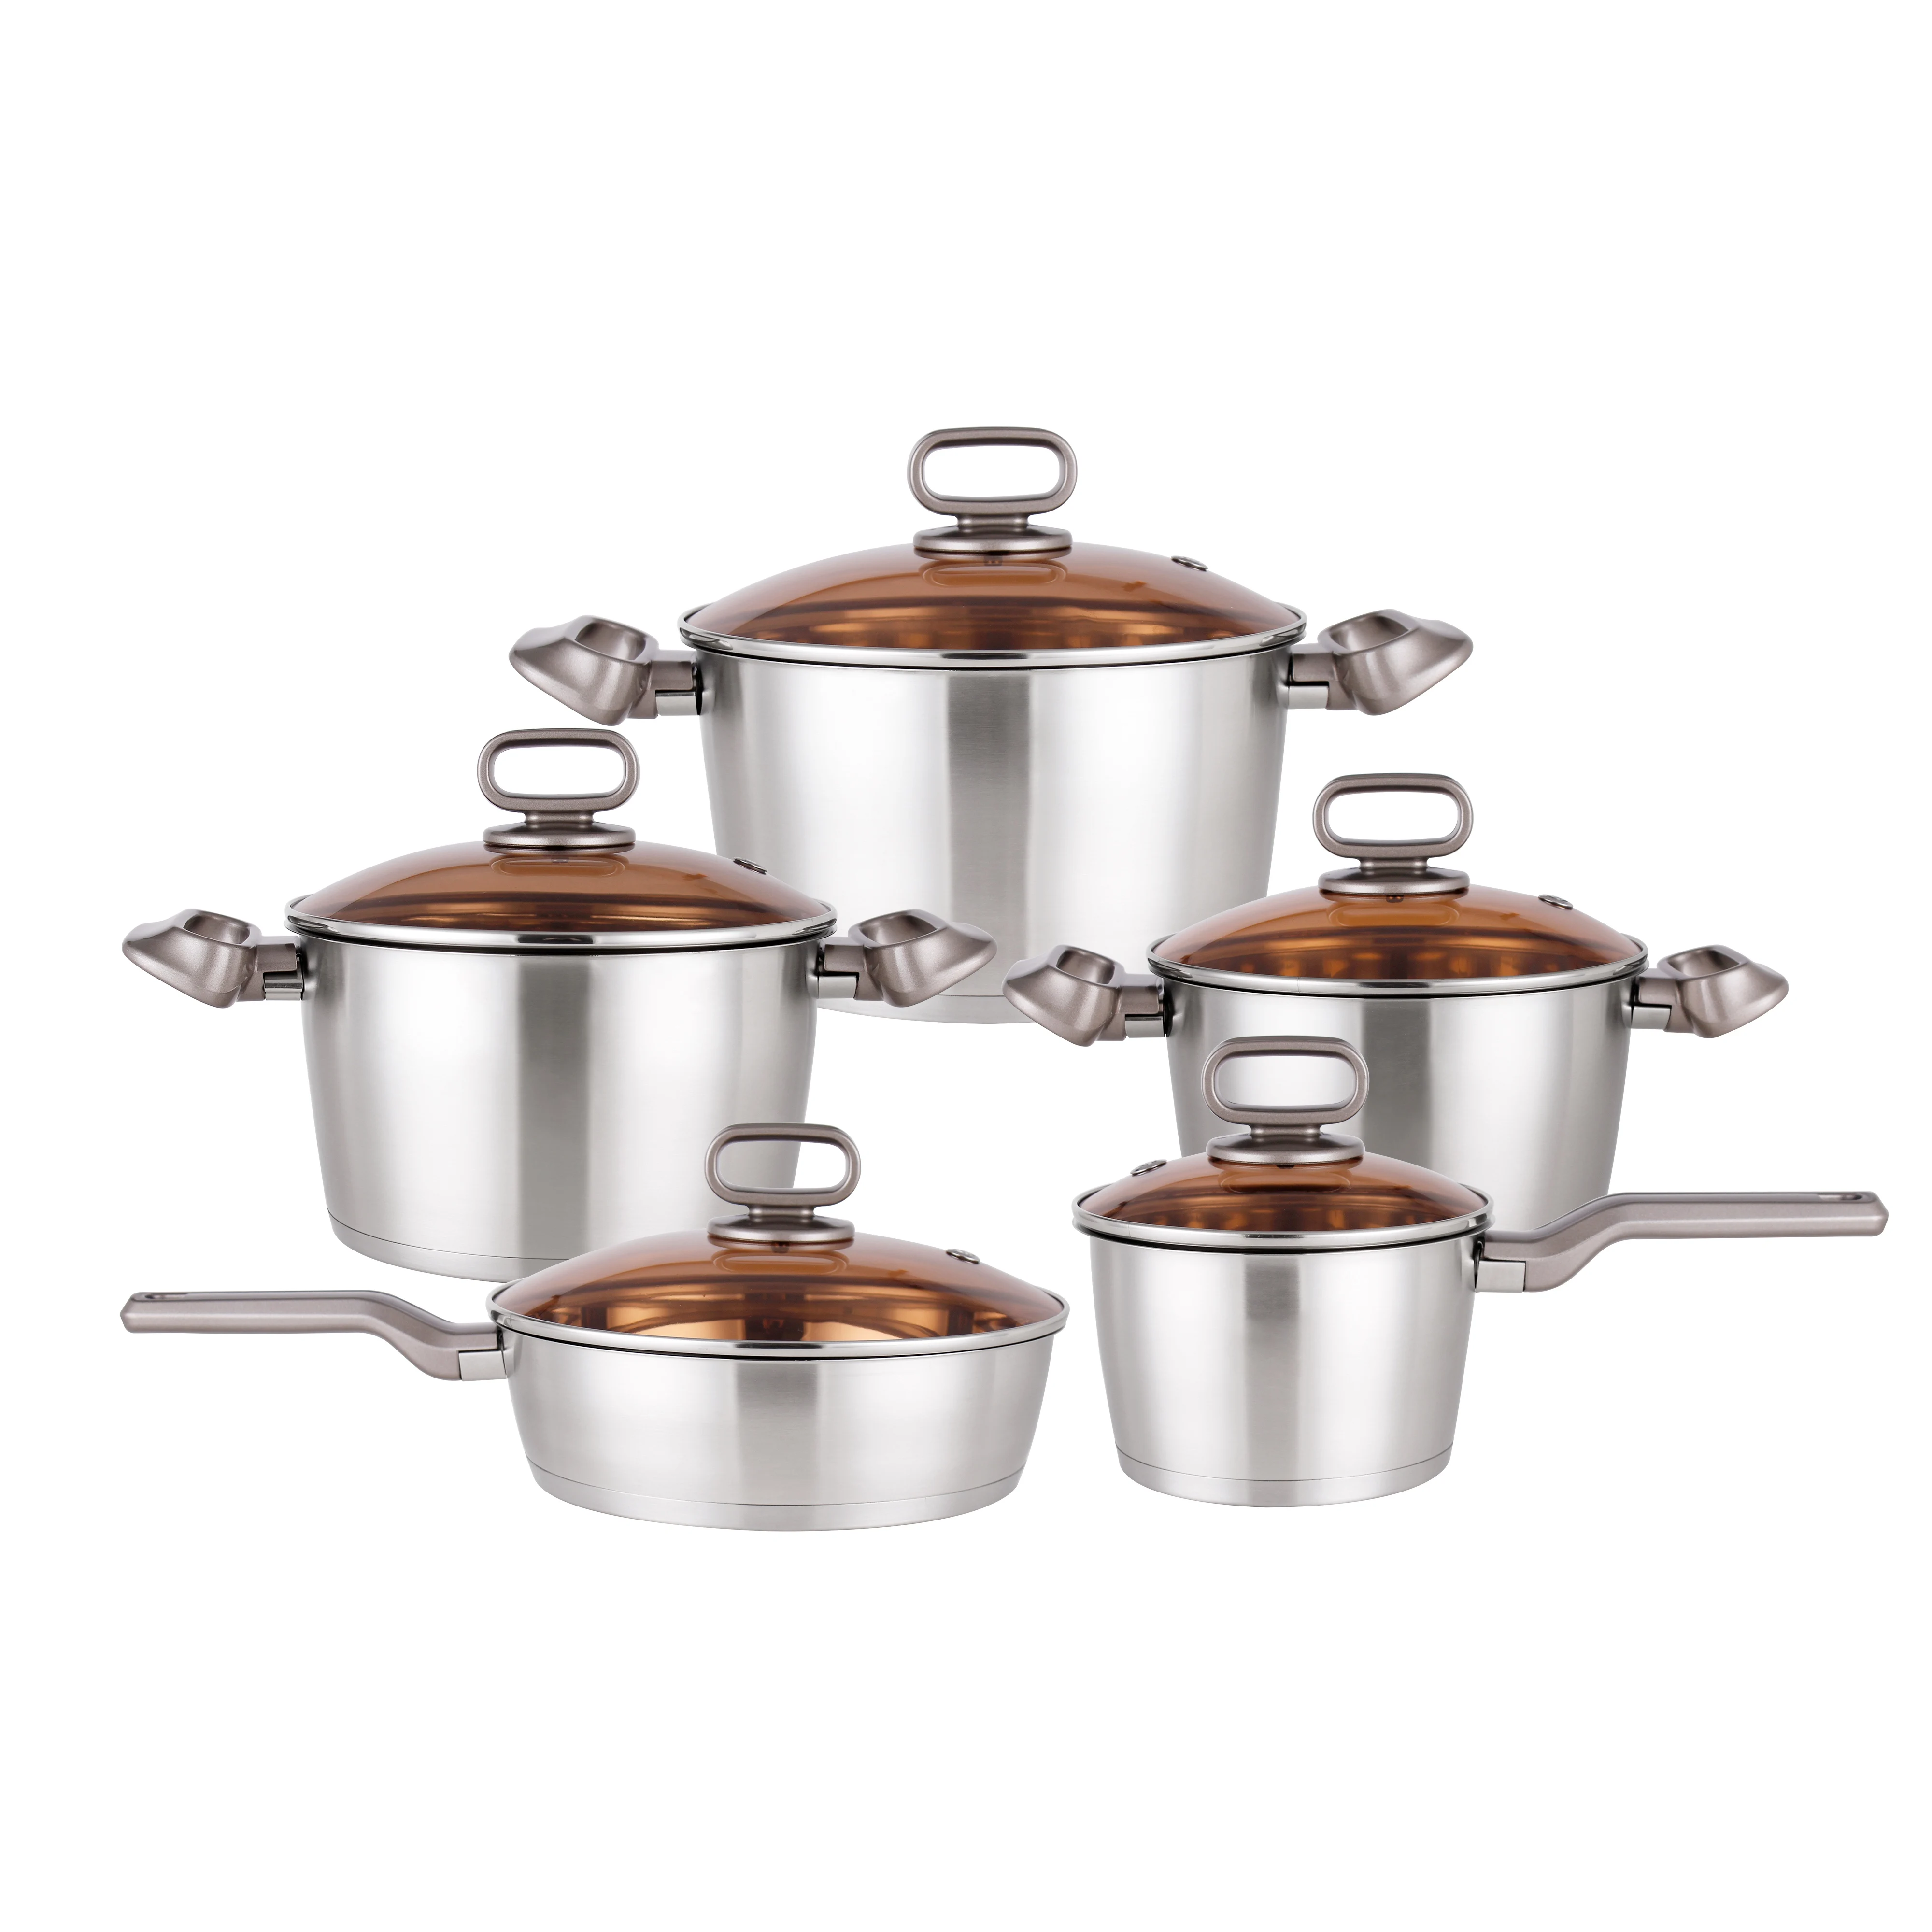 New 10pcs Cookware Set Pot And Pan Set Sandwich Bottom Stainless Steel Cookware Buy 10pcs Cookware Set Sandwich Bottom Stainless Steel Cookware Pot And Pan Set Product On Alibaba Com